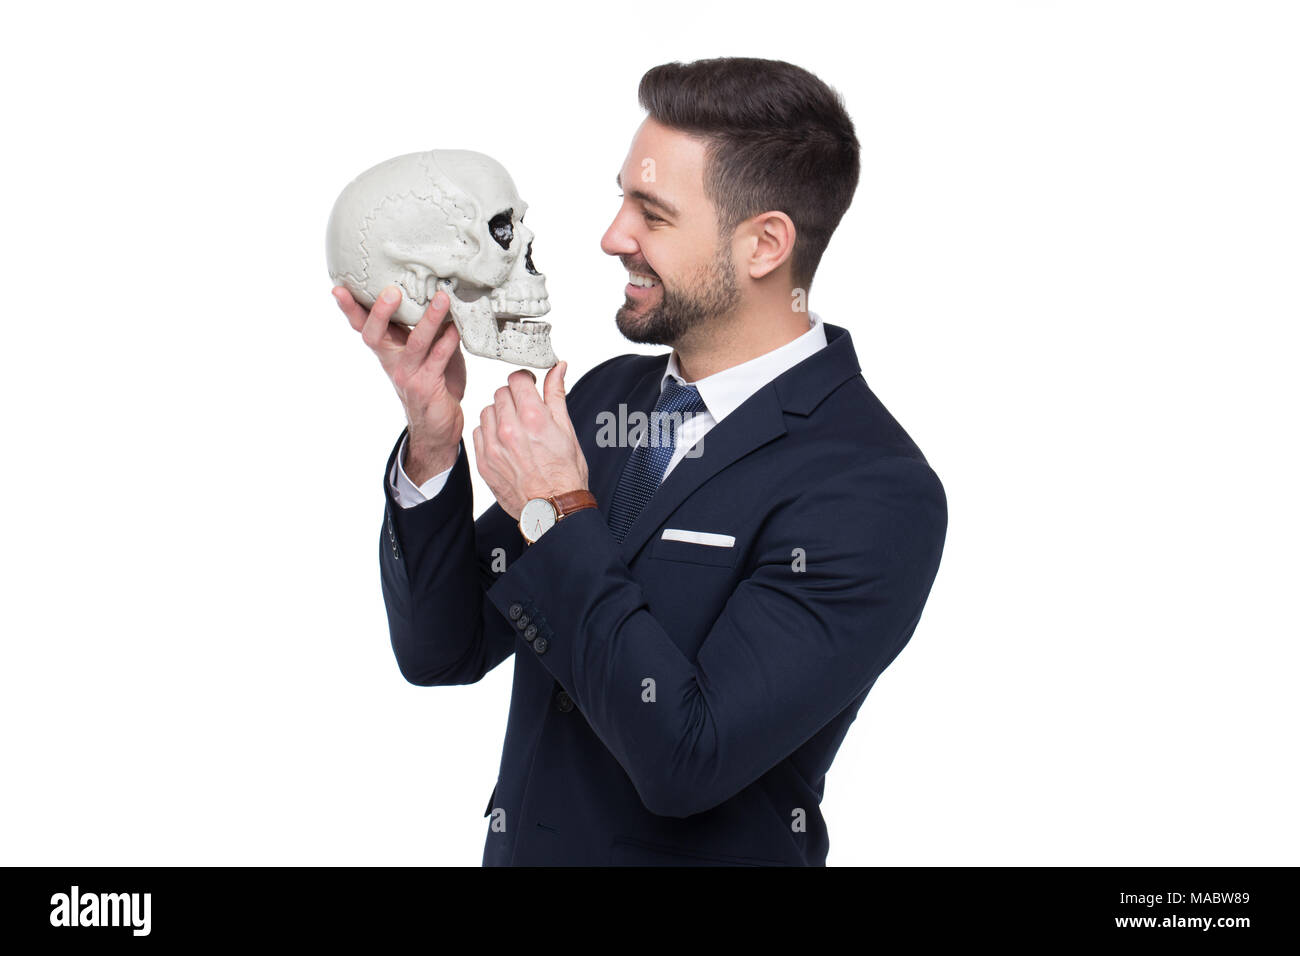 Businessman holding skull and smile portrait, business competition concept, isolated on white Stock Photo